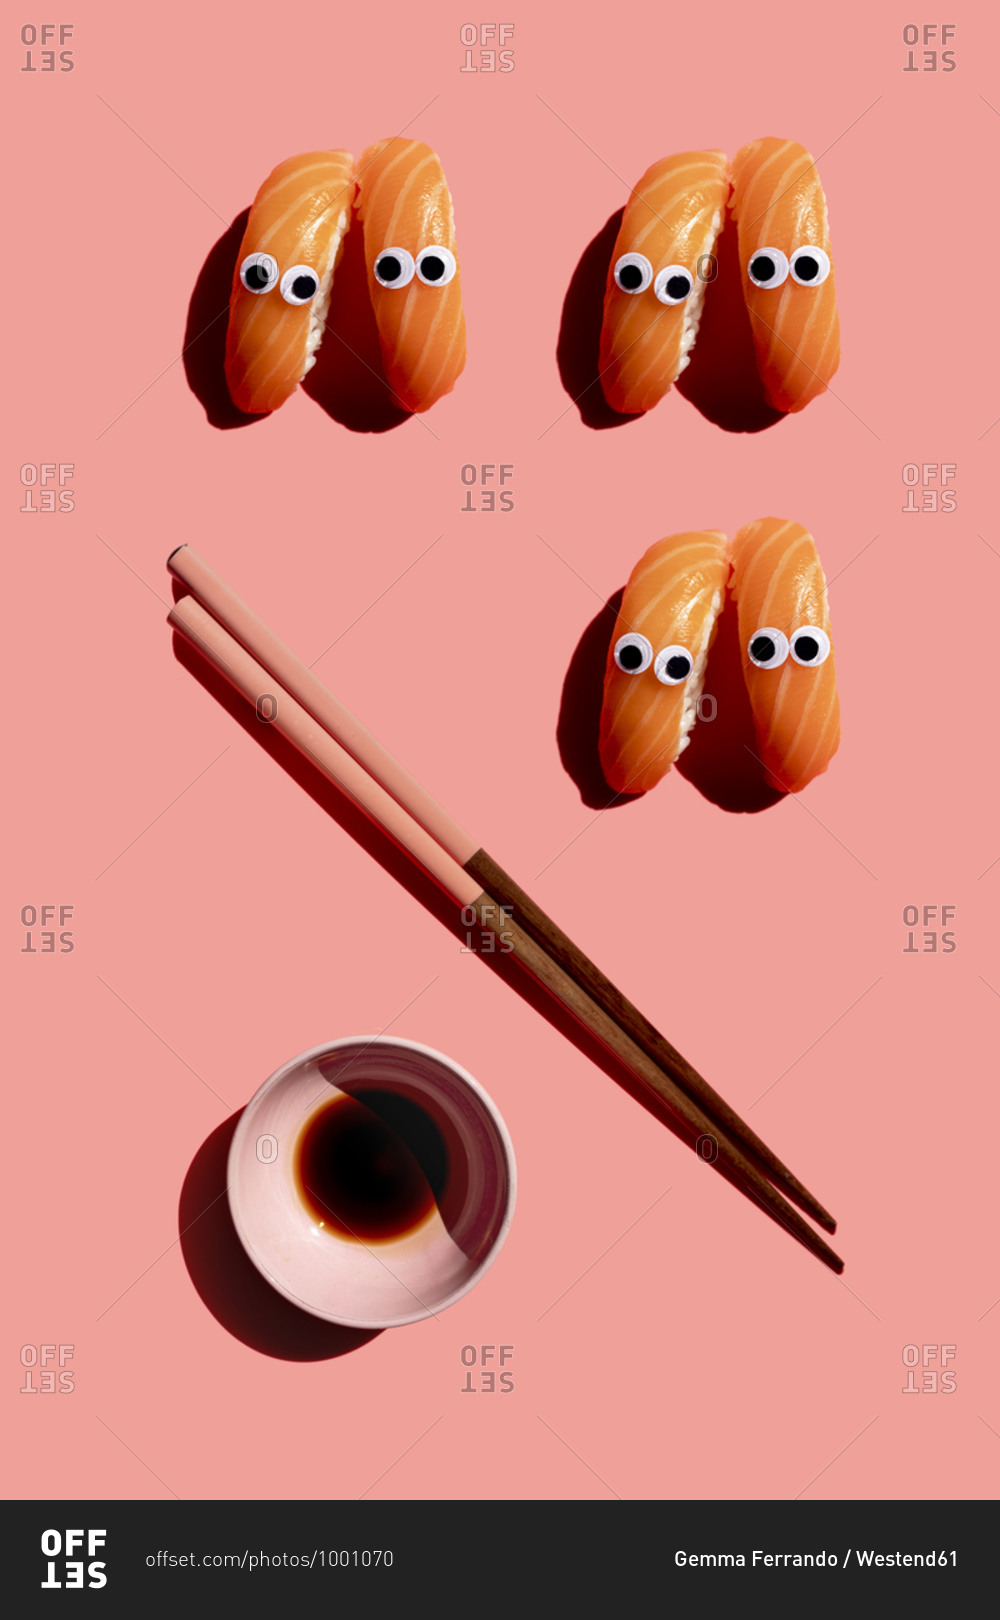 Studio shot of chopsticks- bowl of soy sauce and salmon nigirizushi pieces with googly eyes